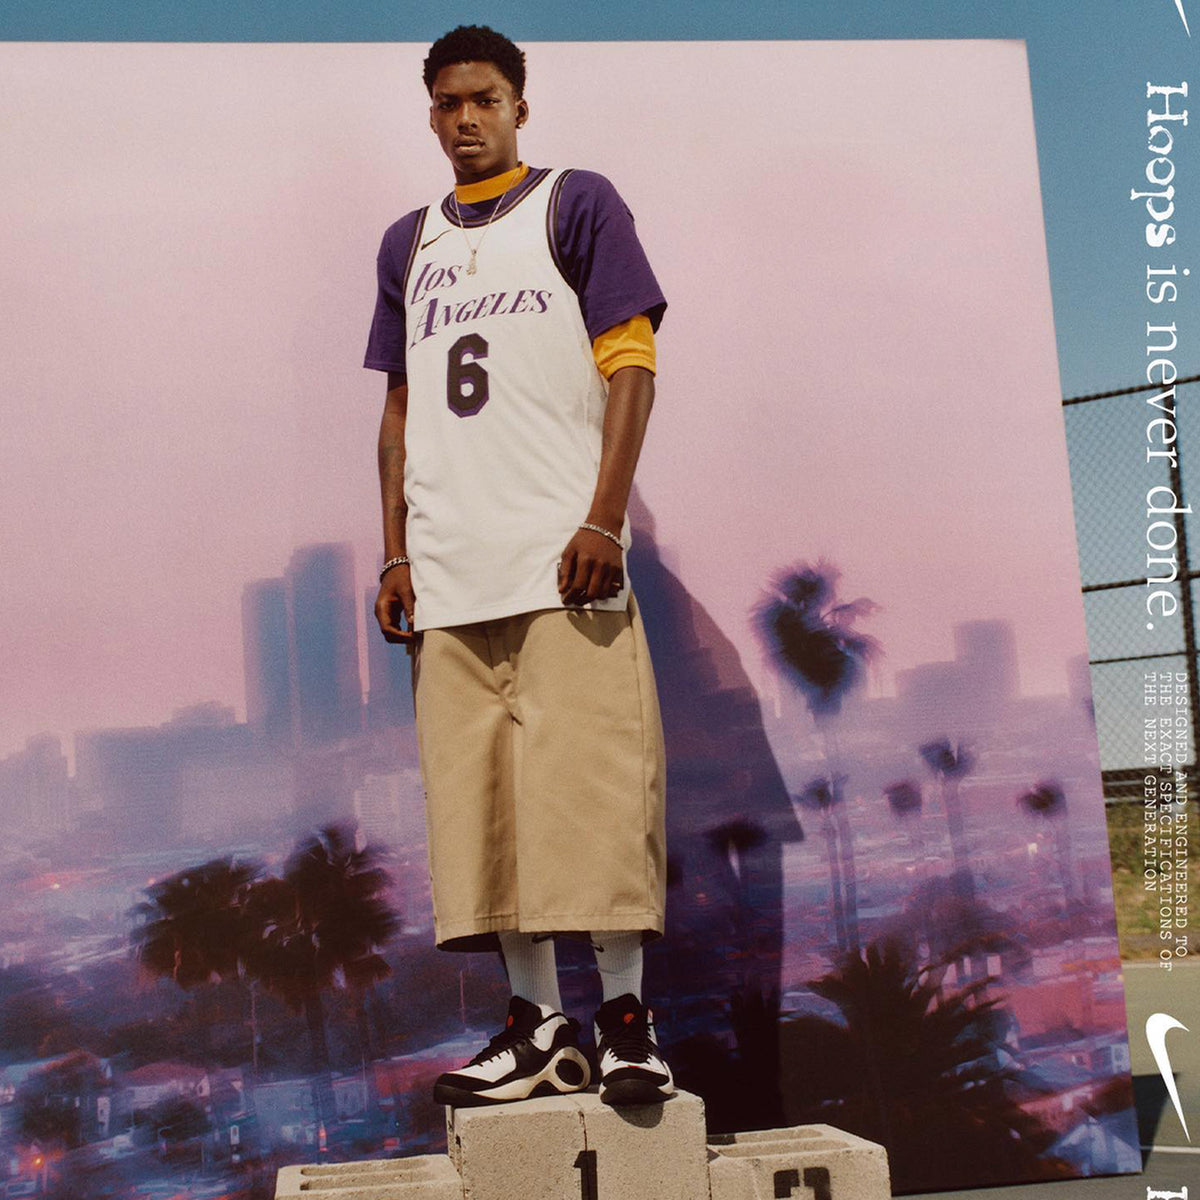 2022 LeBron James Los Angeles Lakers Nike City Edition Jersey